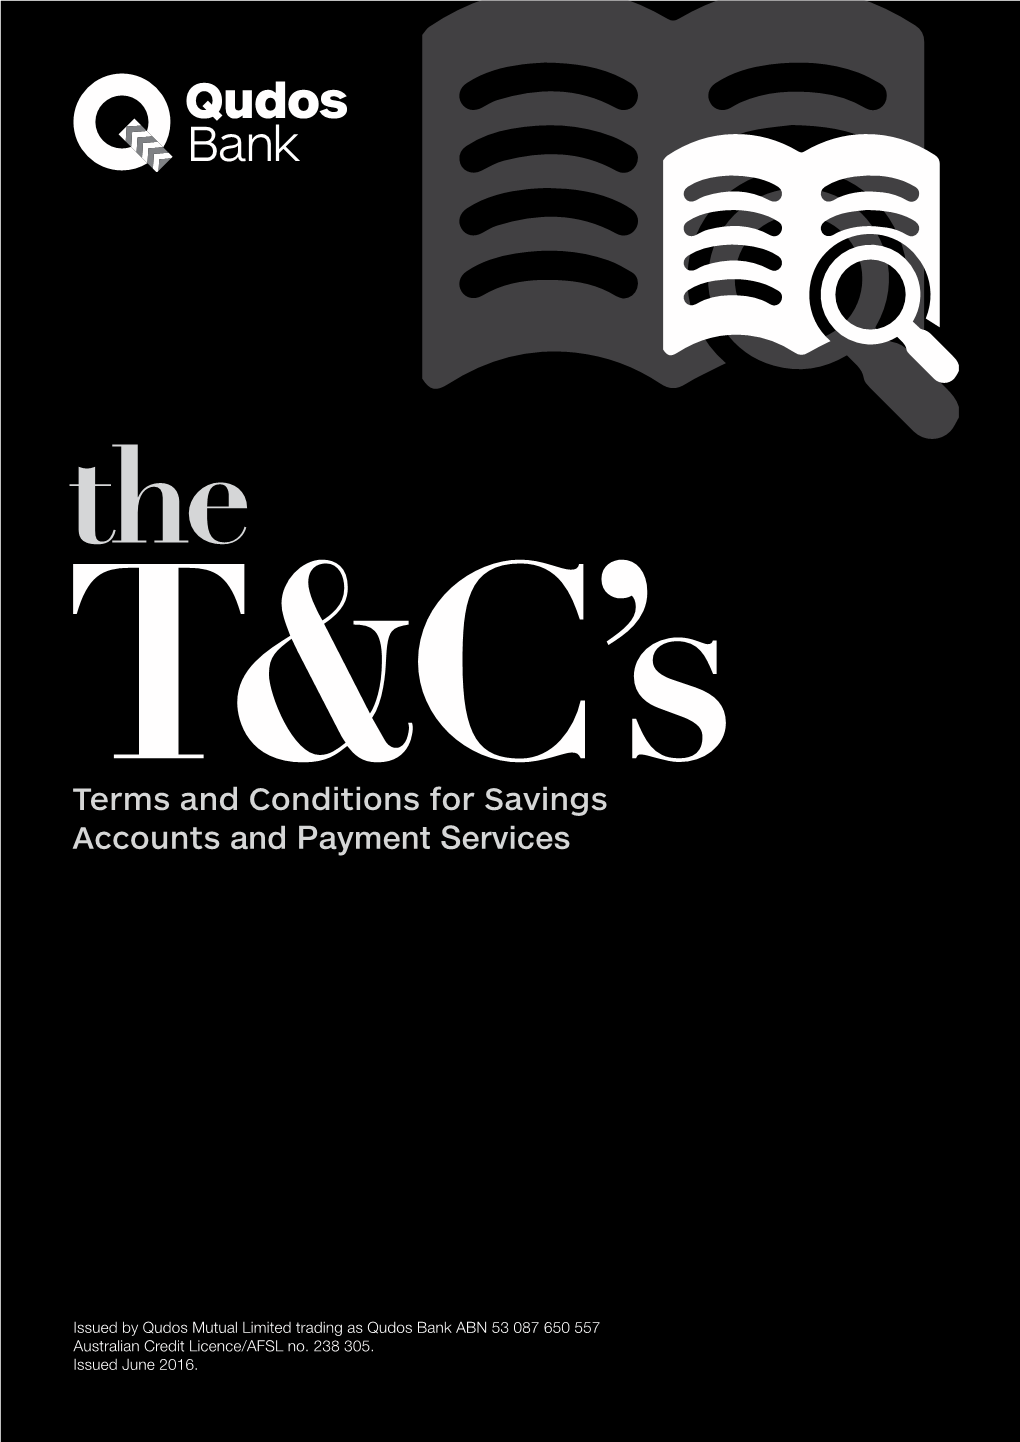 Terms and Conditions for Savings Accounts and Payment Services